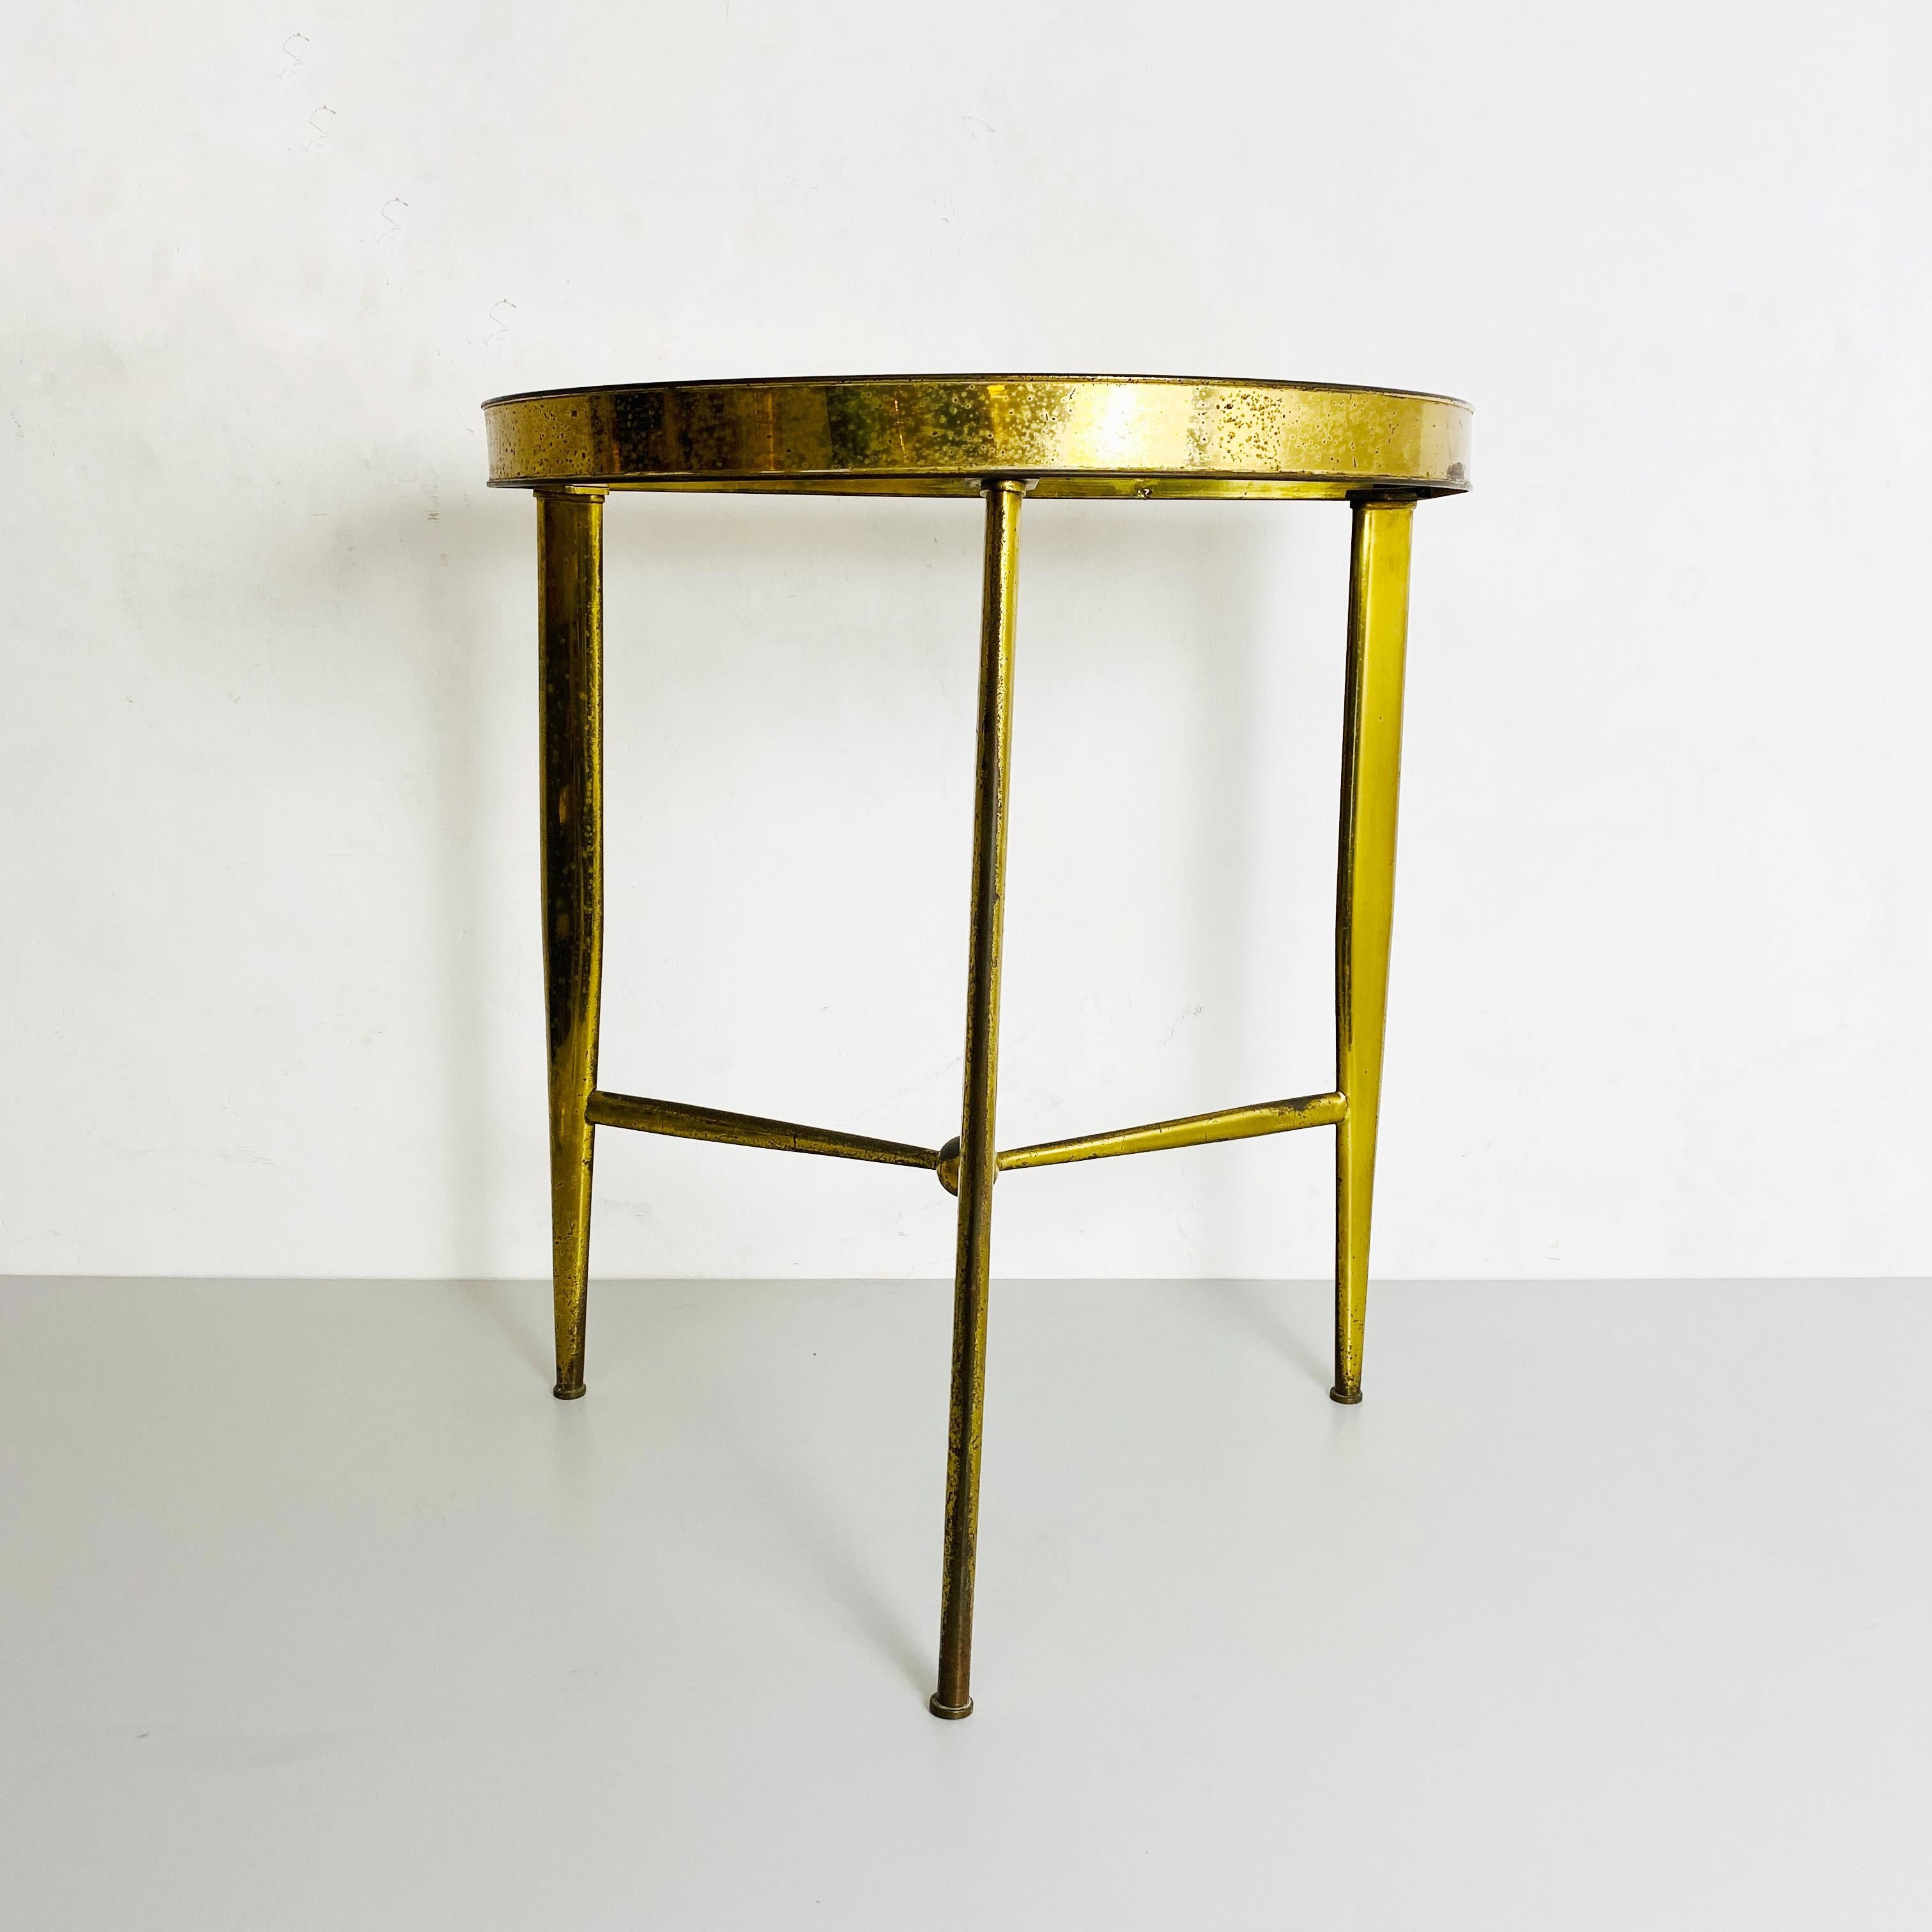 Brass and glass console, 1950s.
Brass irregular shape console with three legs welded together with a central sphere and upper glass top.
1950s

Good condition, some signs of aging.

Measurements in cm 51 x 35 x 59 H.